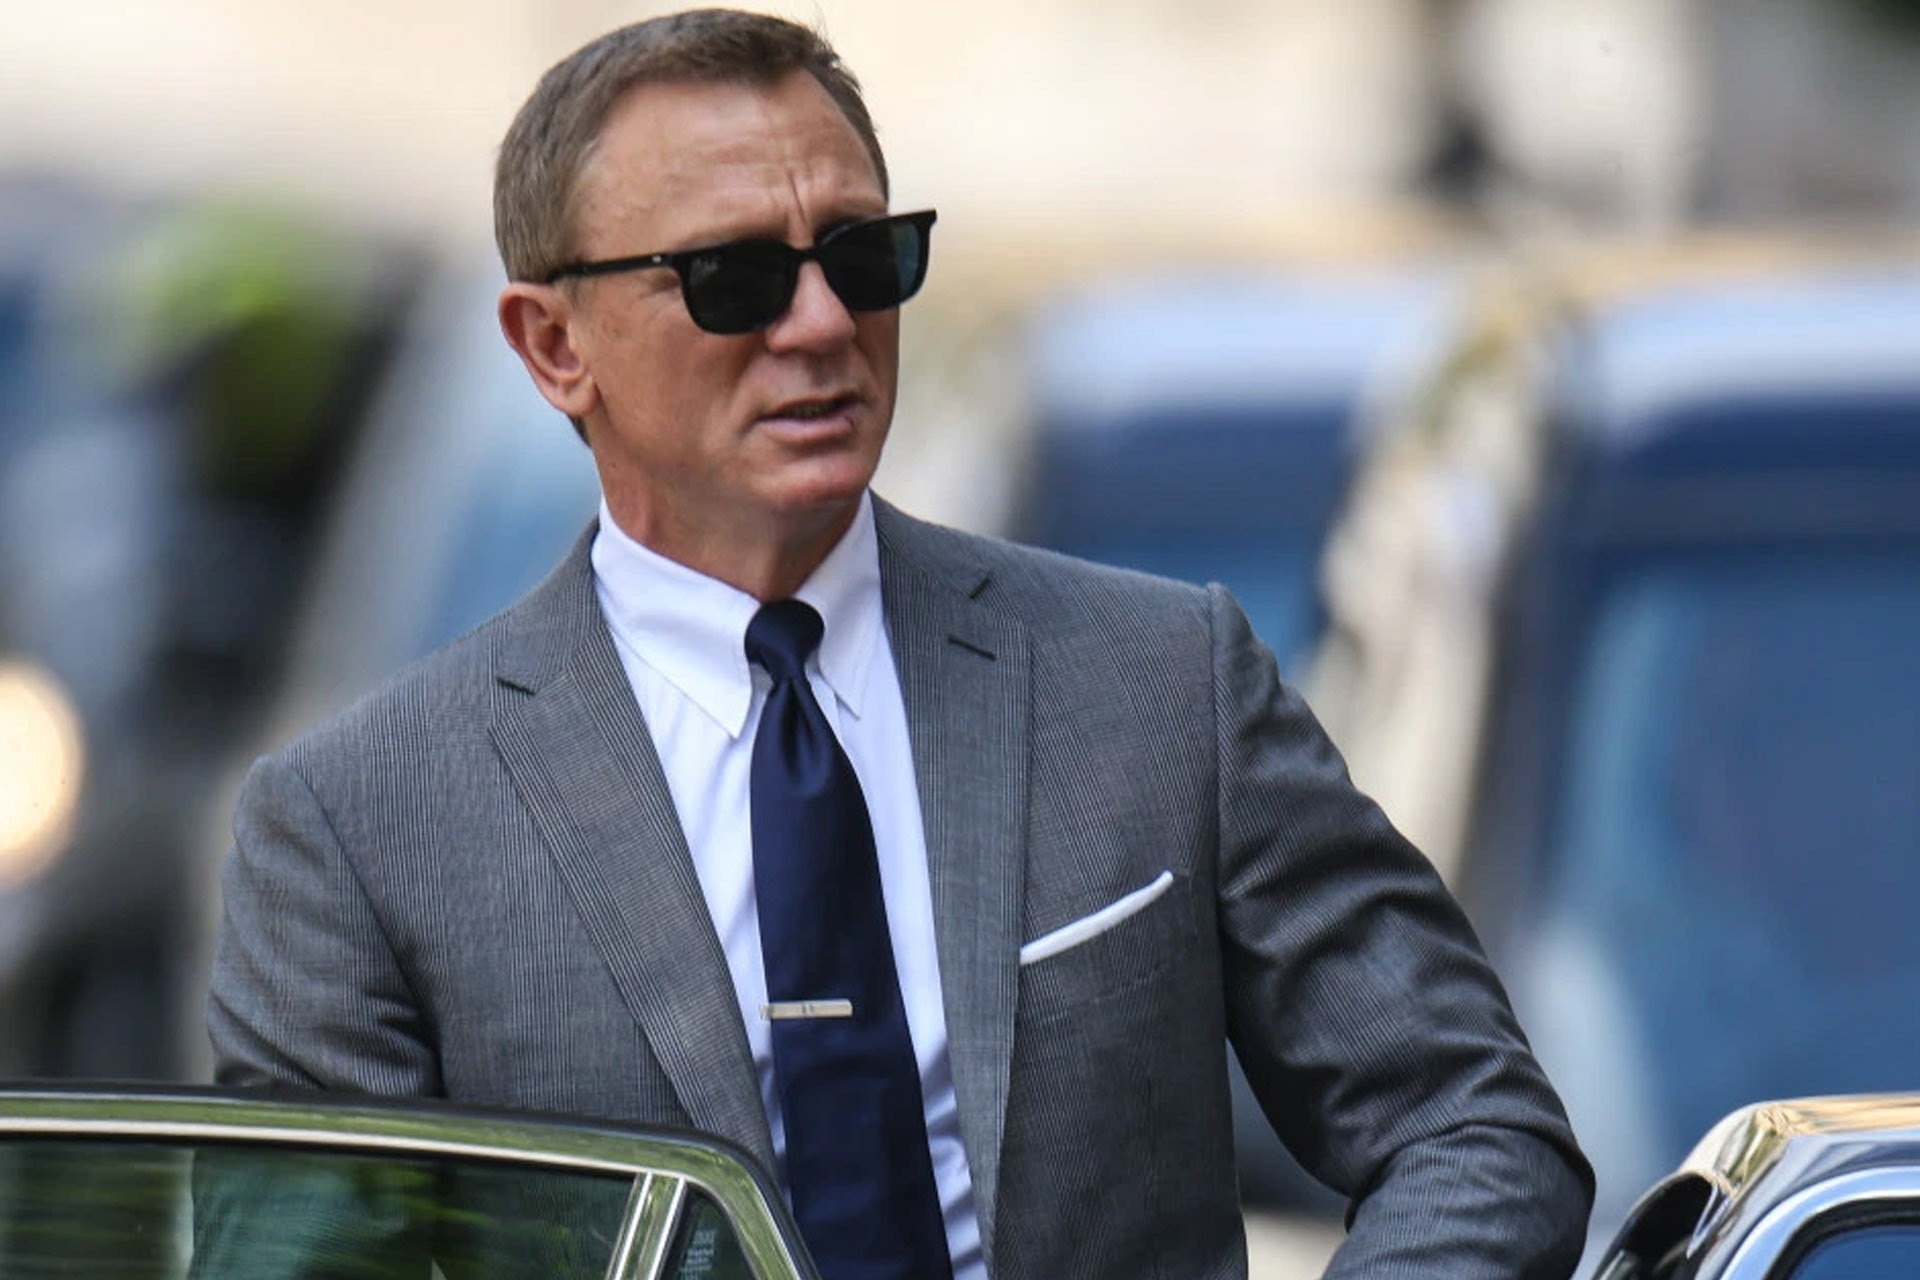 The New James Bond Movie Isn't Out Yet—But We Already Know 007's